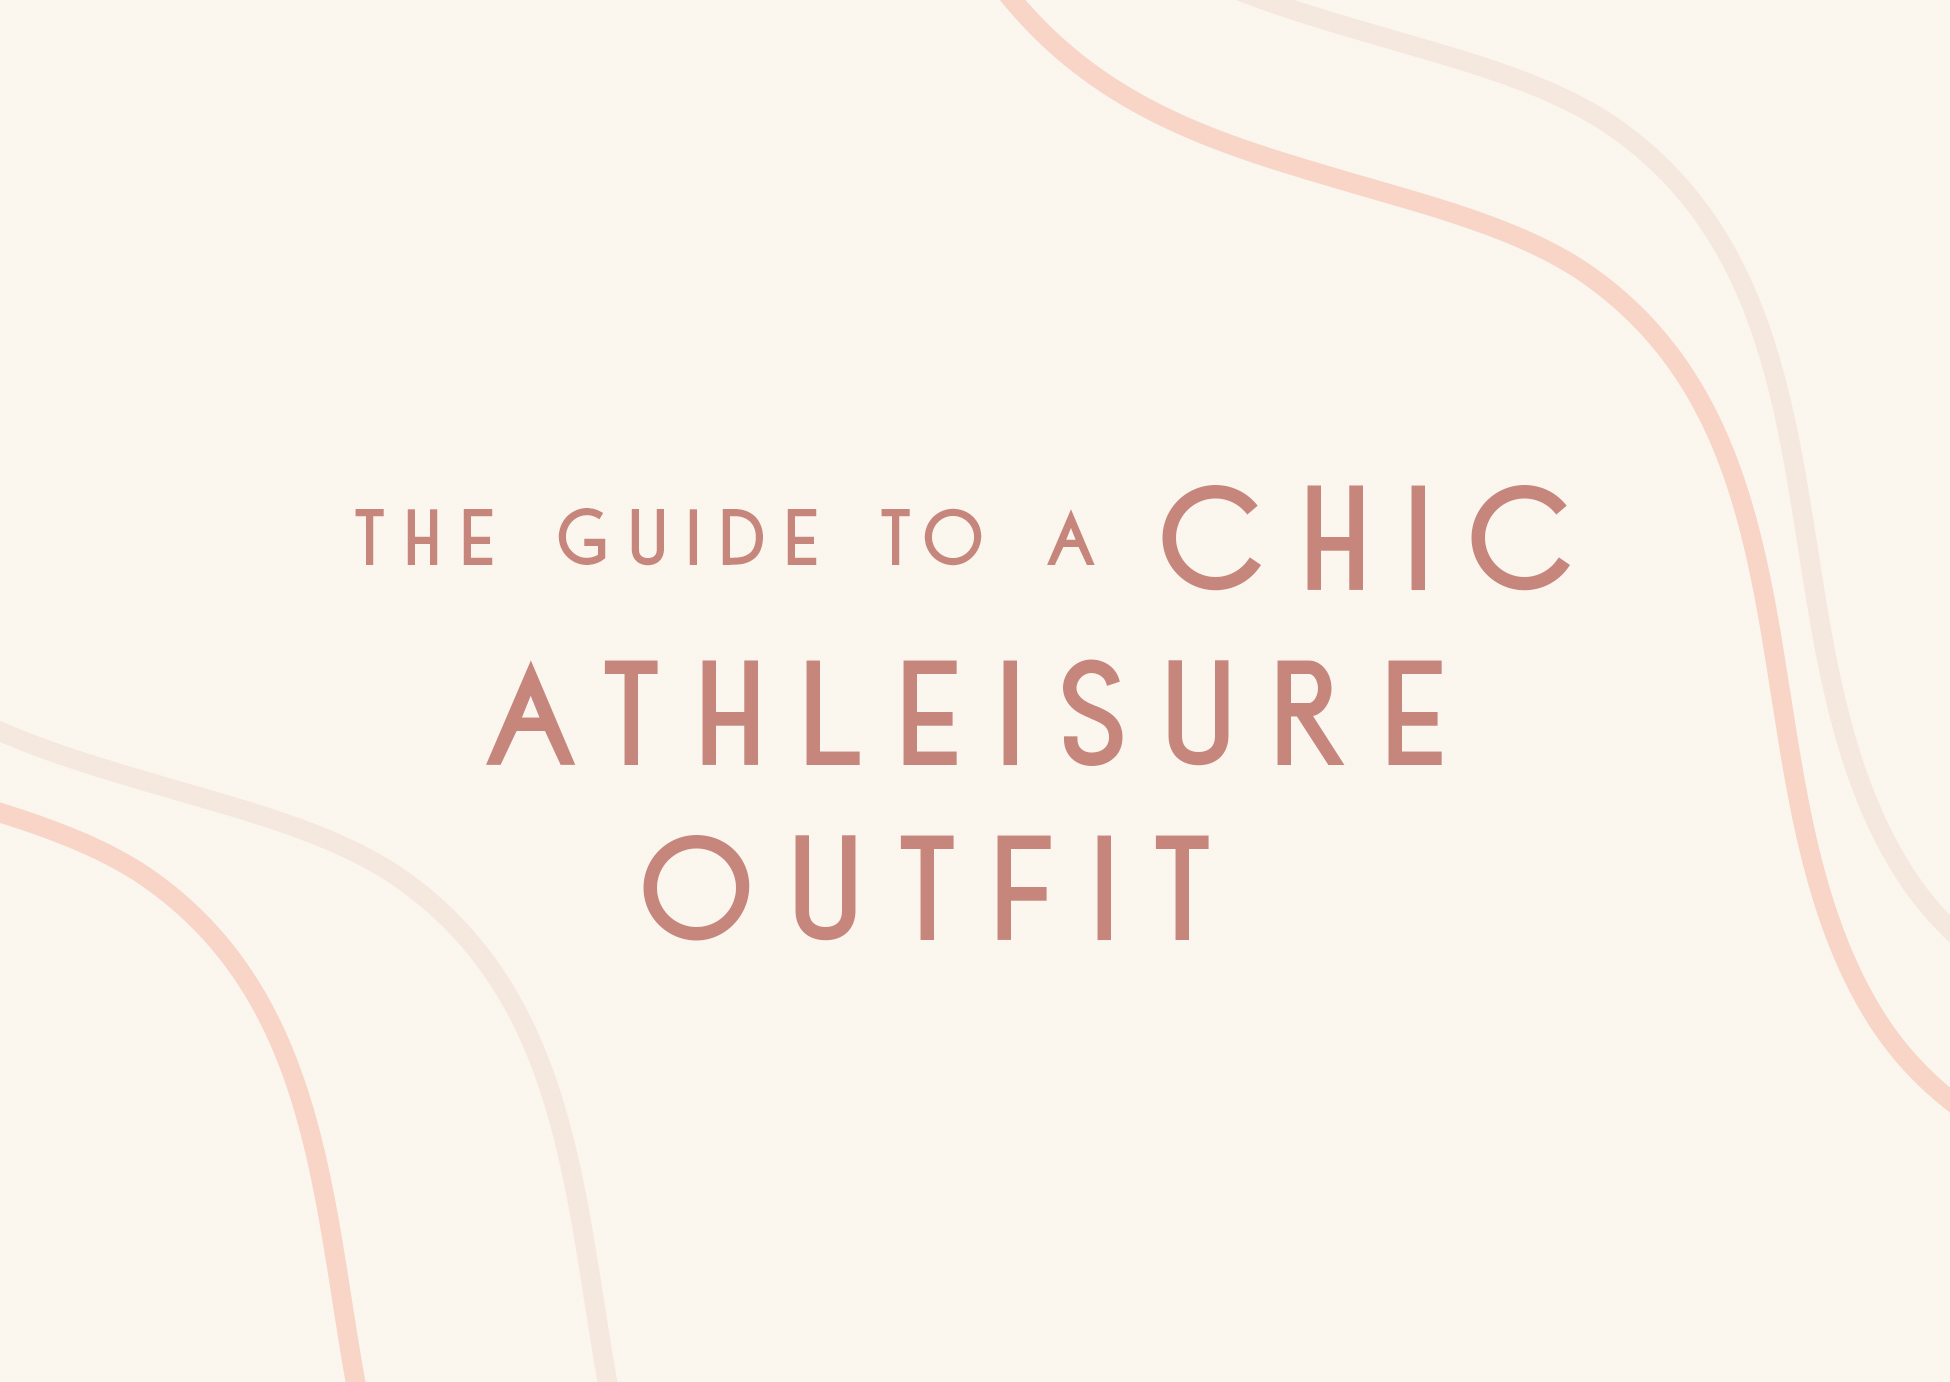 The Guide to a Chic Athleisure Look